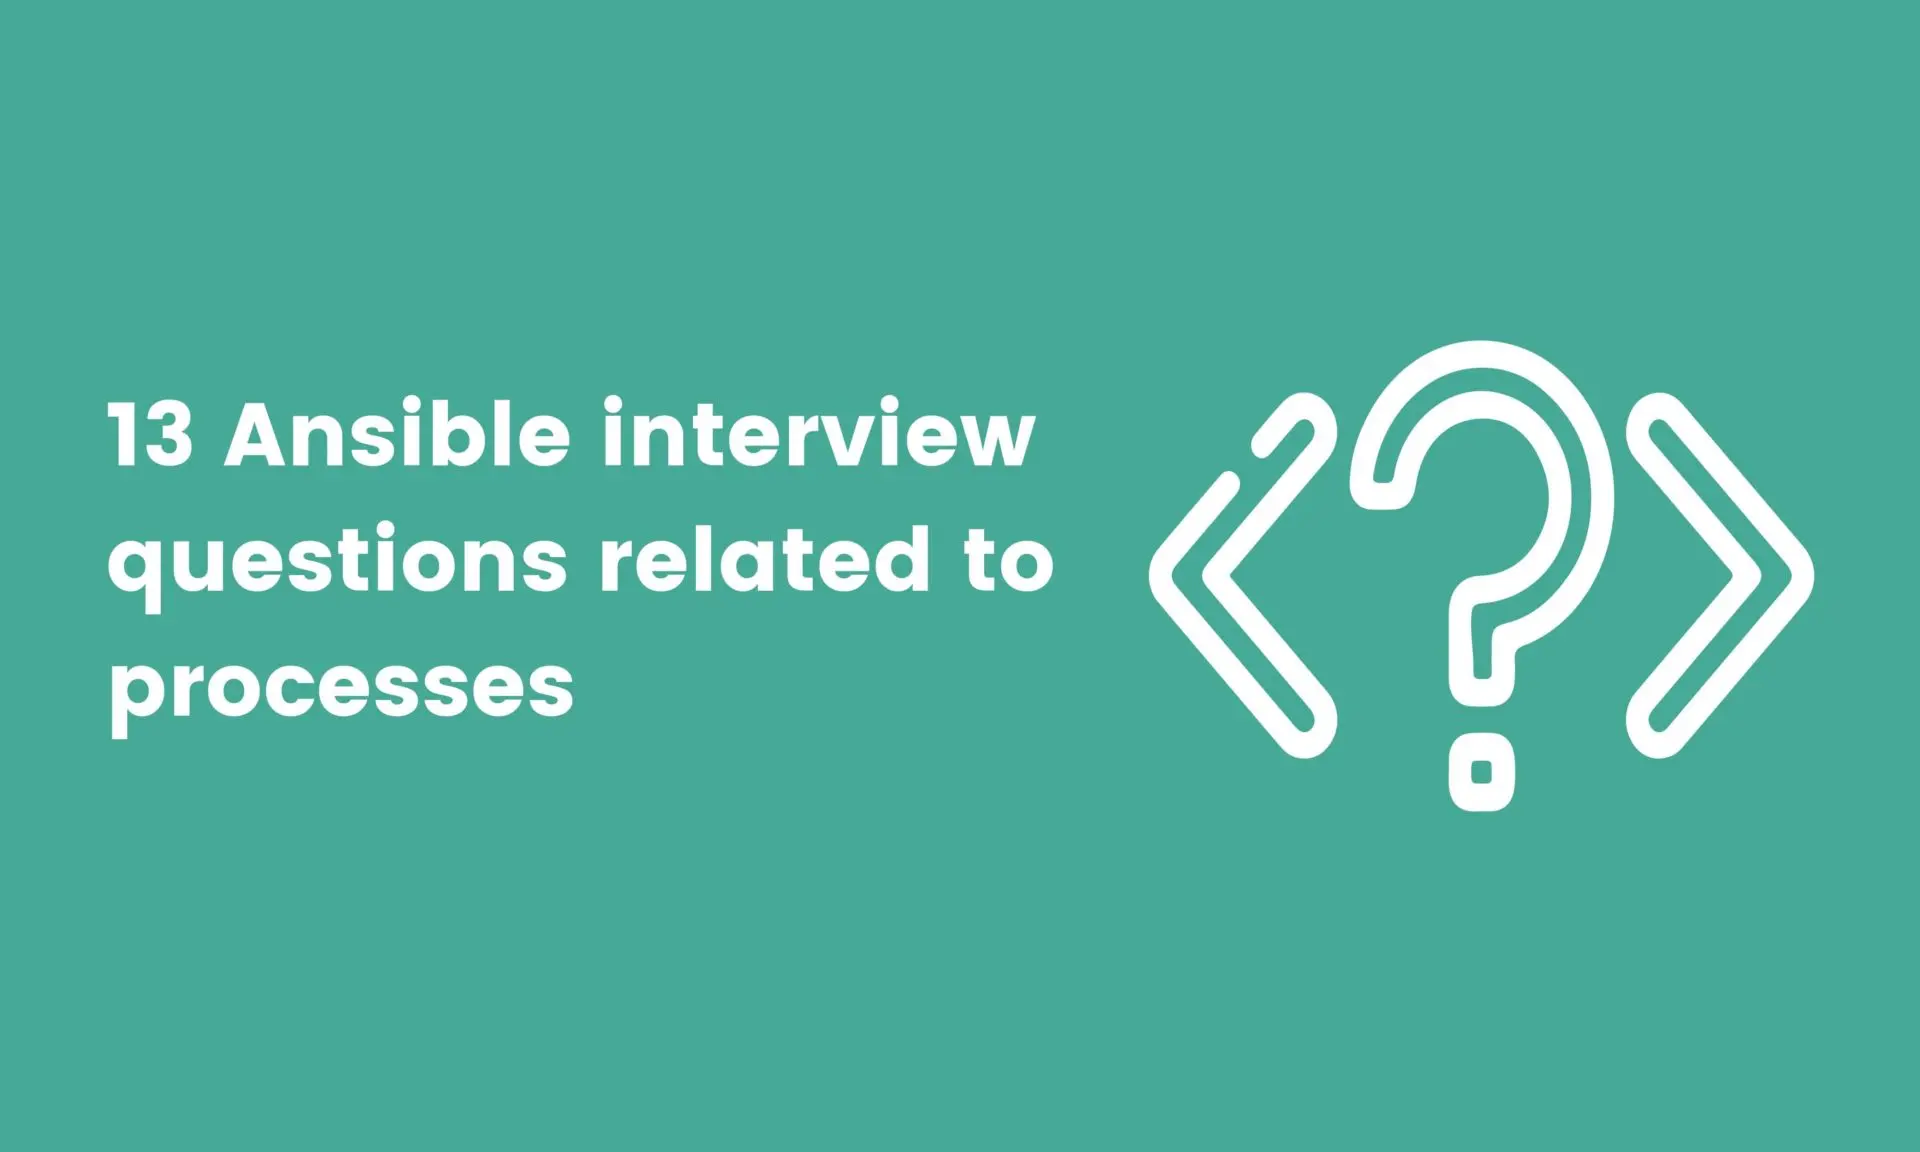 13 Ansible interview questions related to processes